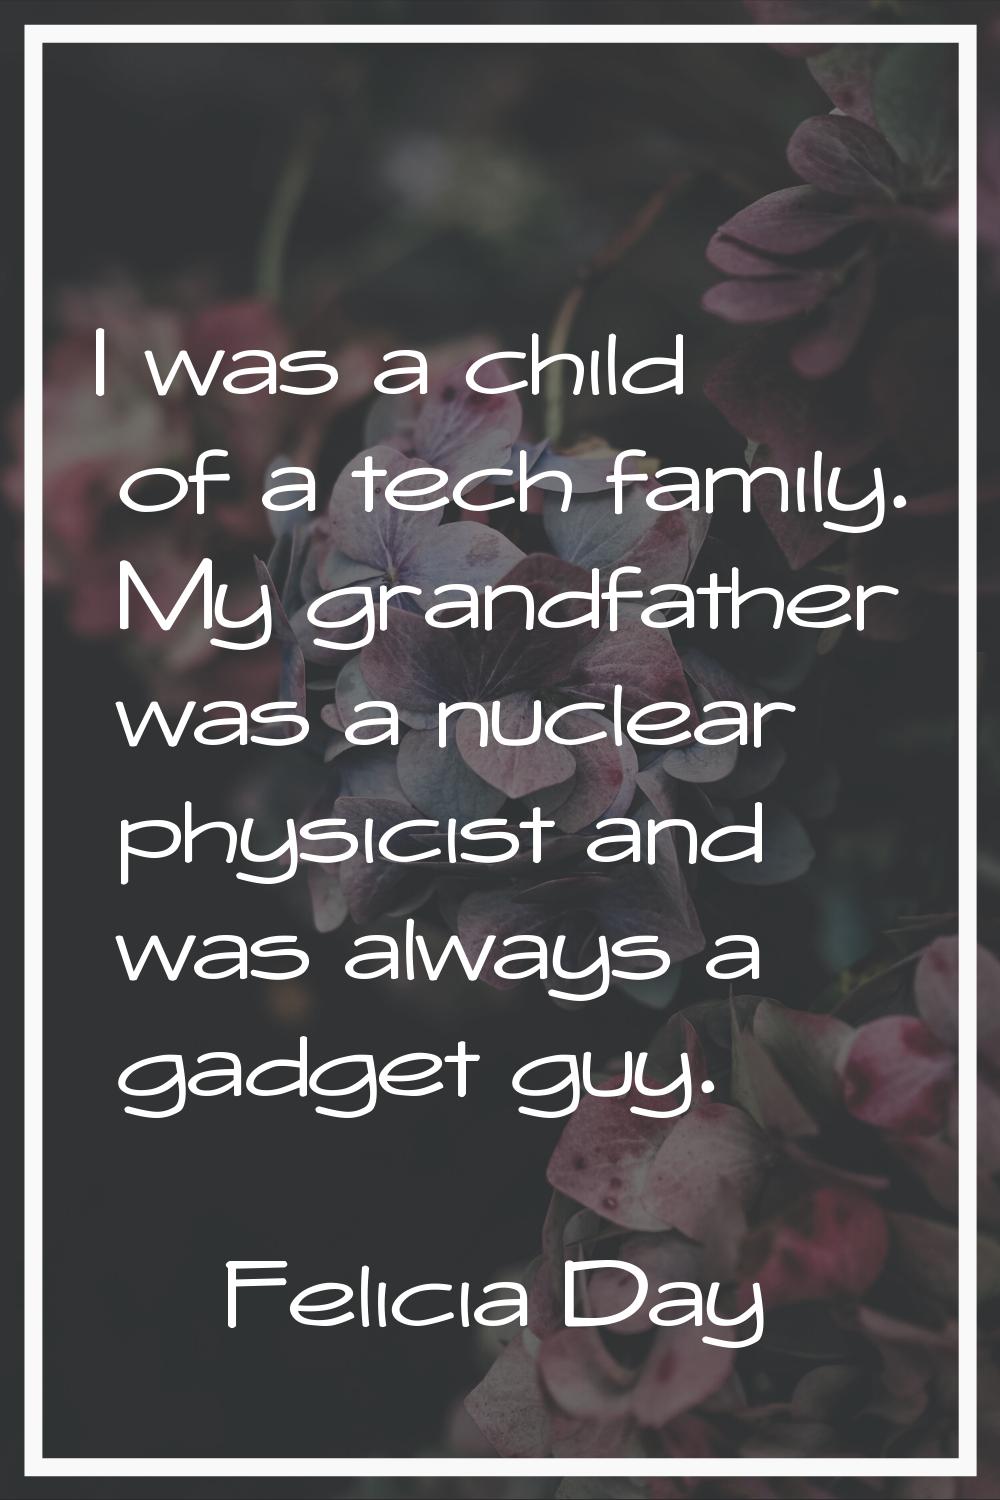 I was a child of a tech family. My grandfather was a nuclear physicist and was always a gadget guy.